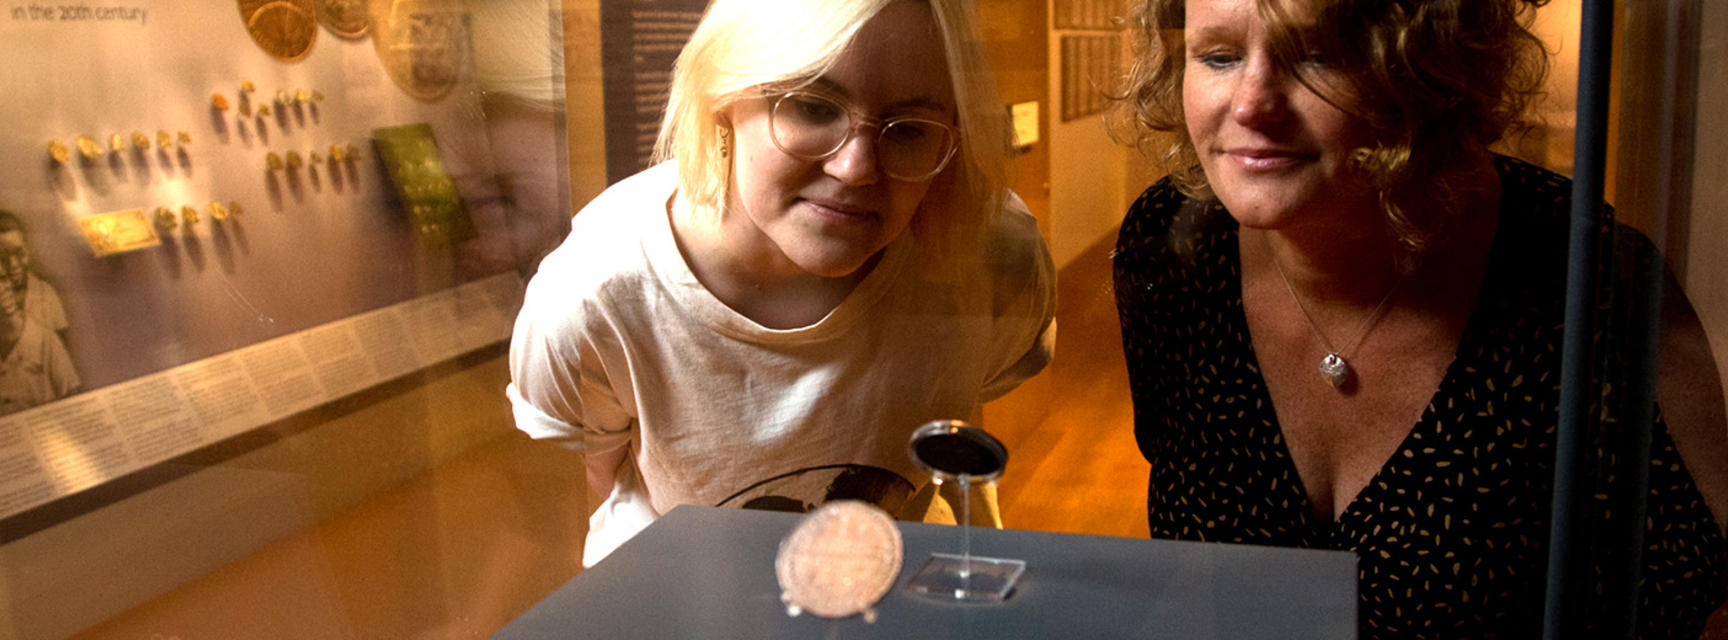 Visitors looking at the Oxford Crown coin in Money Gallery